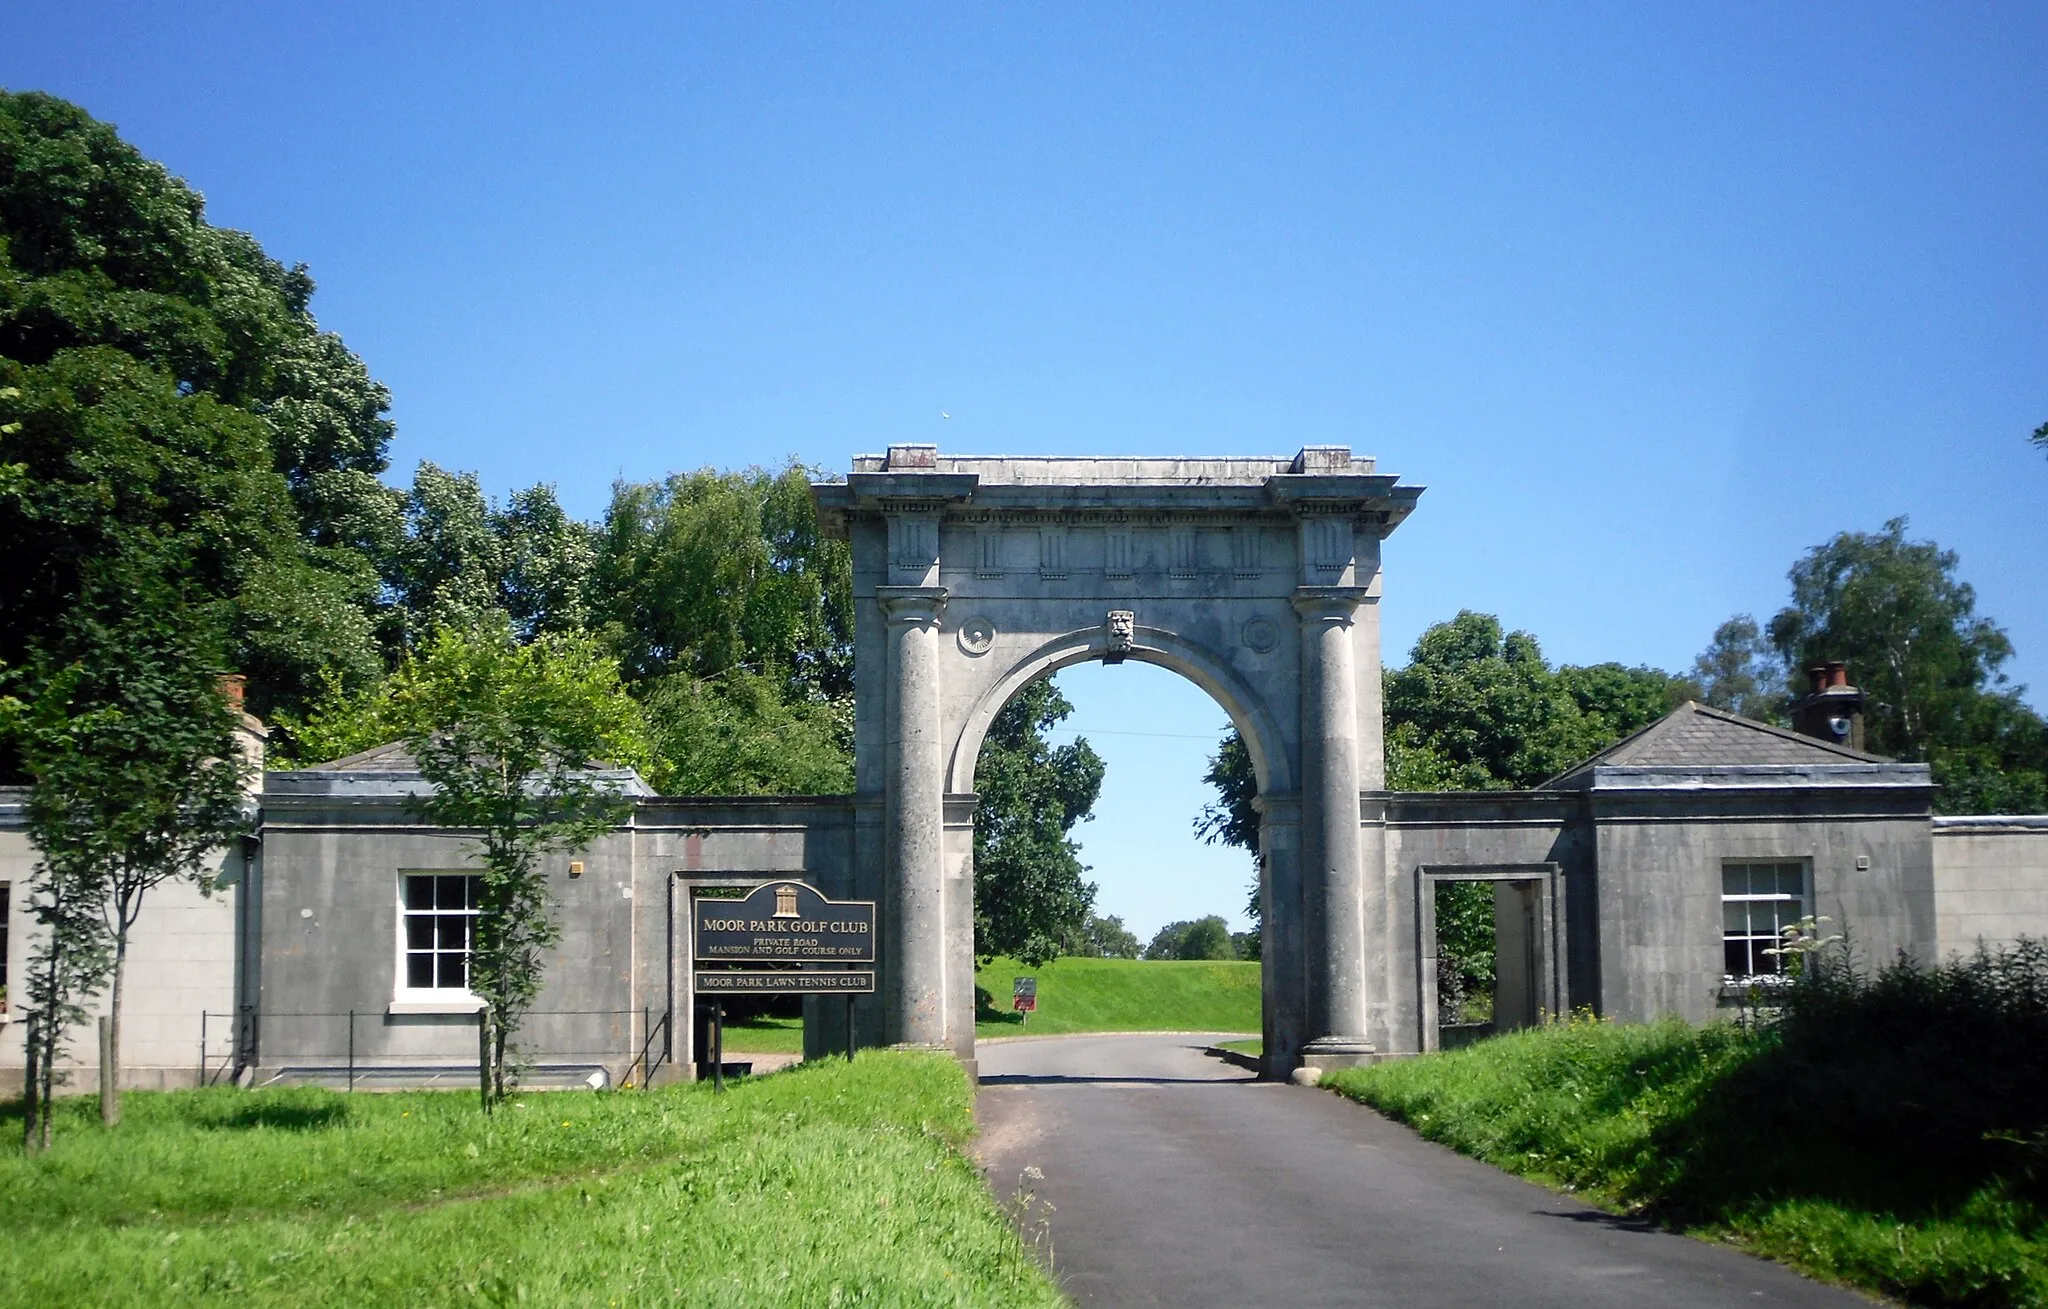 Photo showing: Gateway to Moor Park